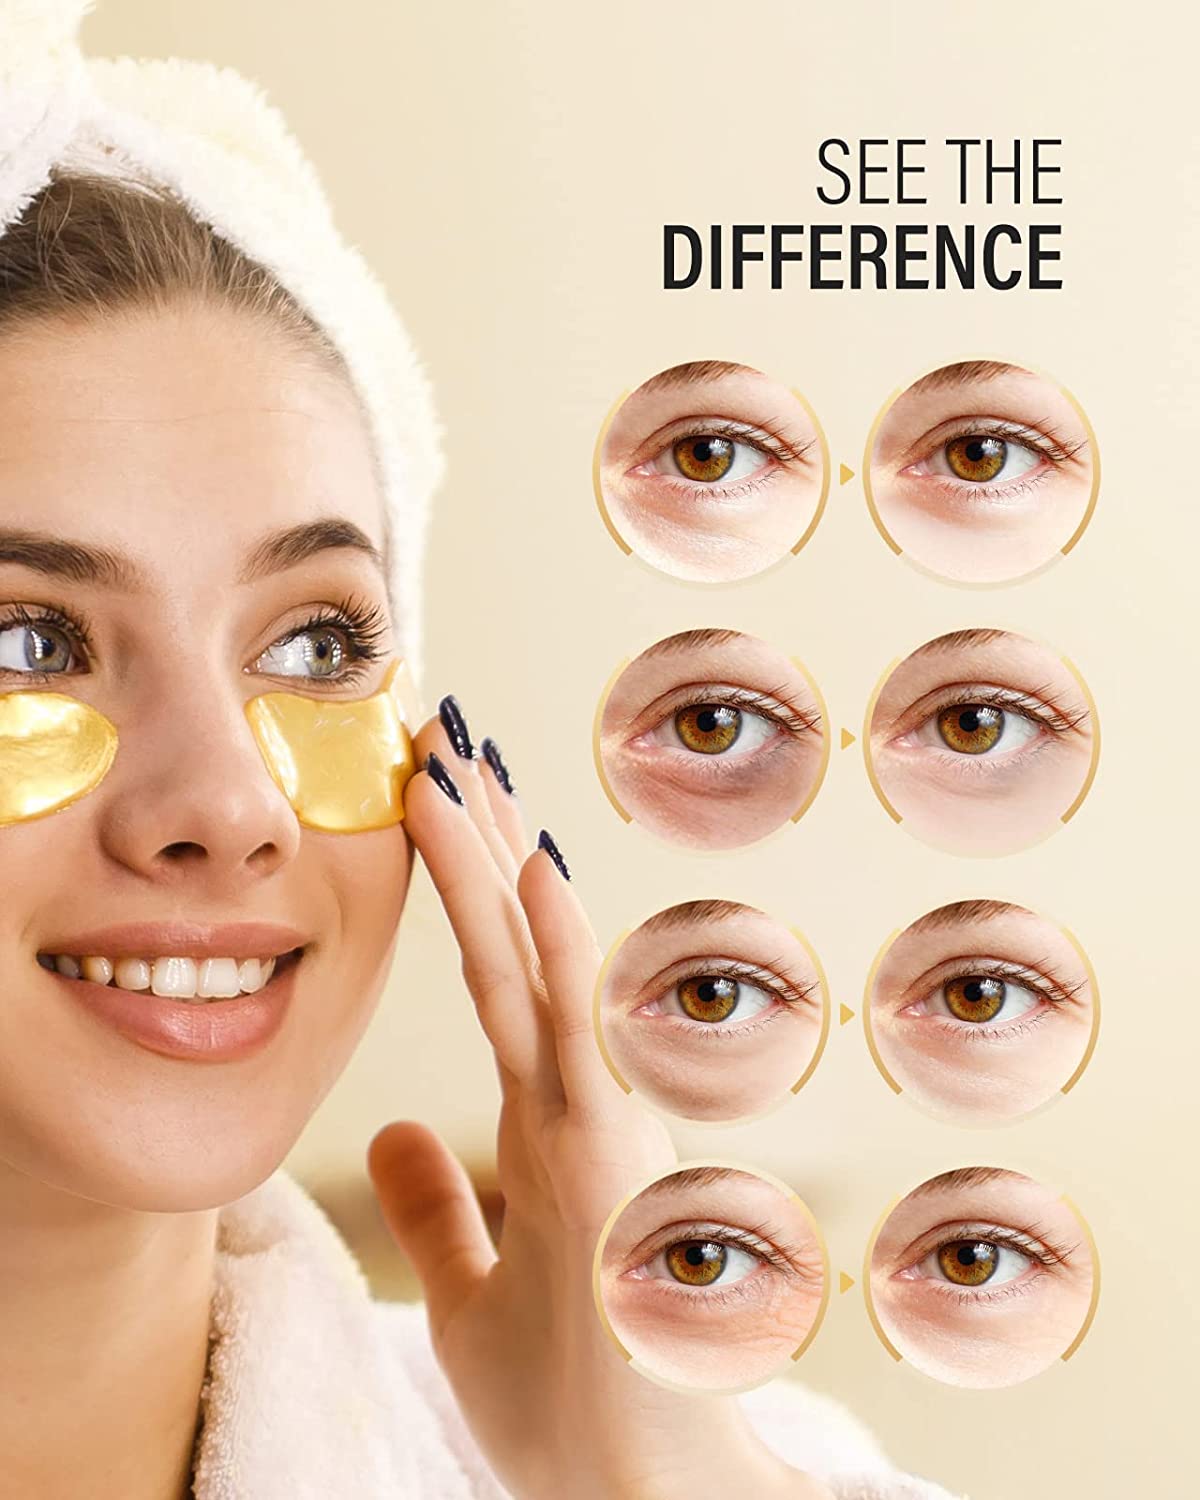 A woman is wearing a pair of 24 karat gold eye masks under her eyes. There are also 8 images of a single eye which is showing before and after images. The text says, 'See the difference.'